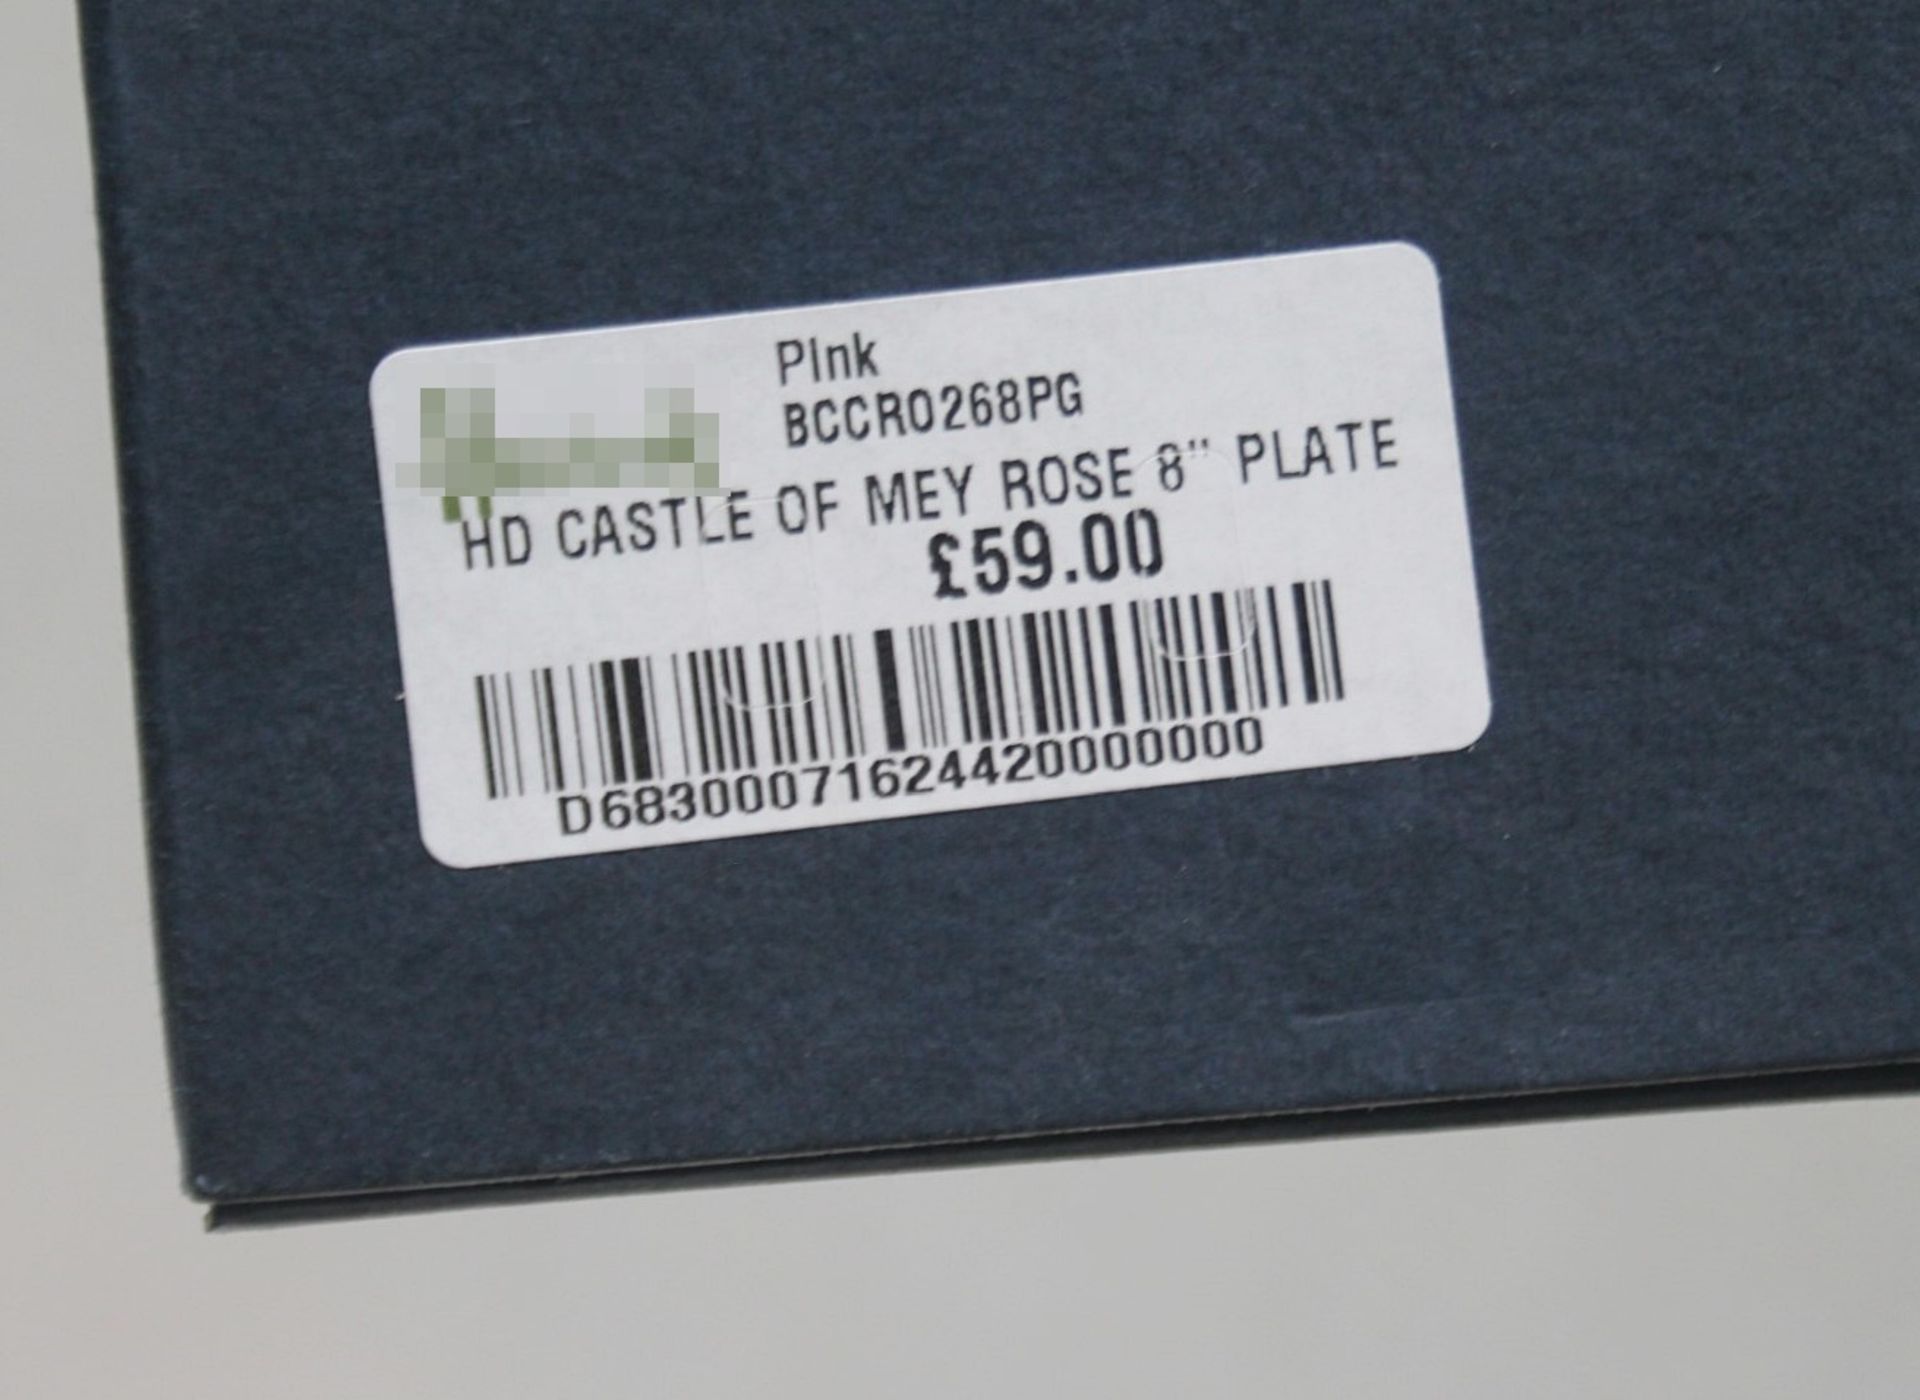 1 x HALCYON DAYS Fine Bone China Castle Of Mey Rose 8" Collectable Plate - Original Price £59.95 - Image 2 of 5